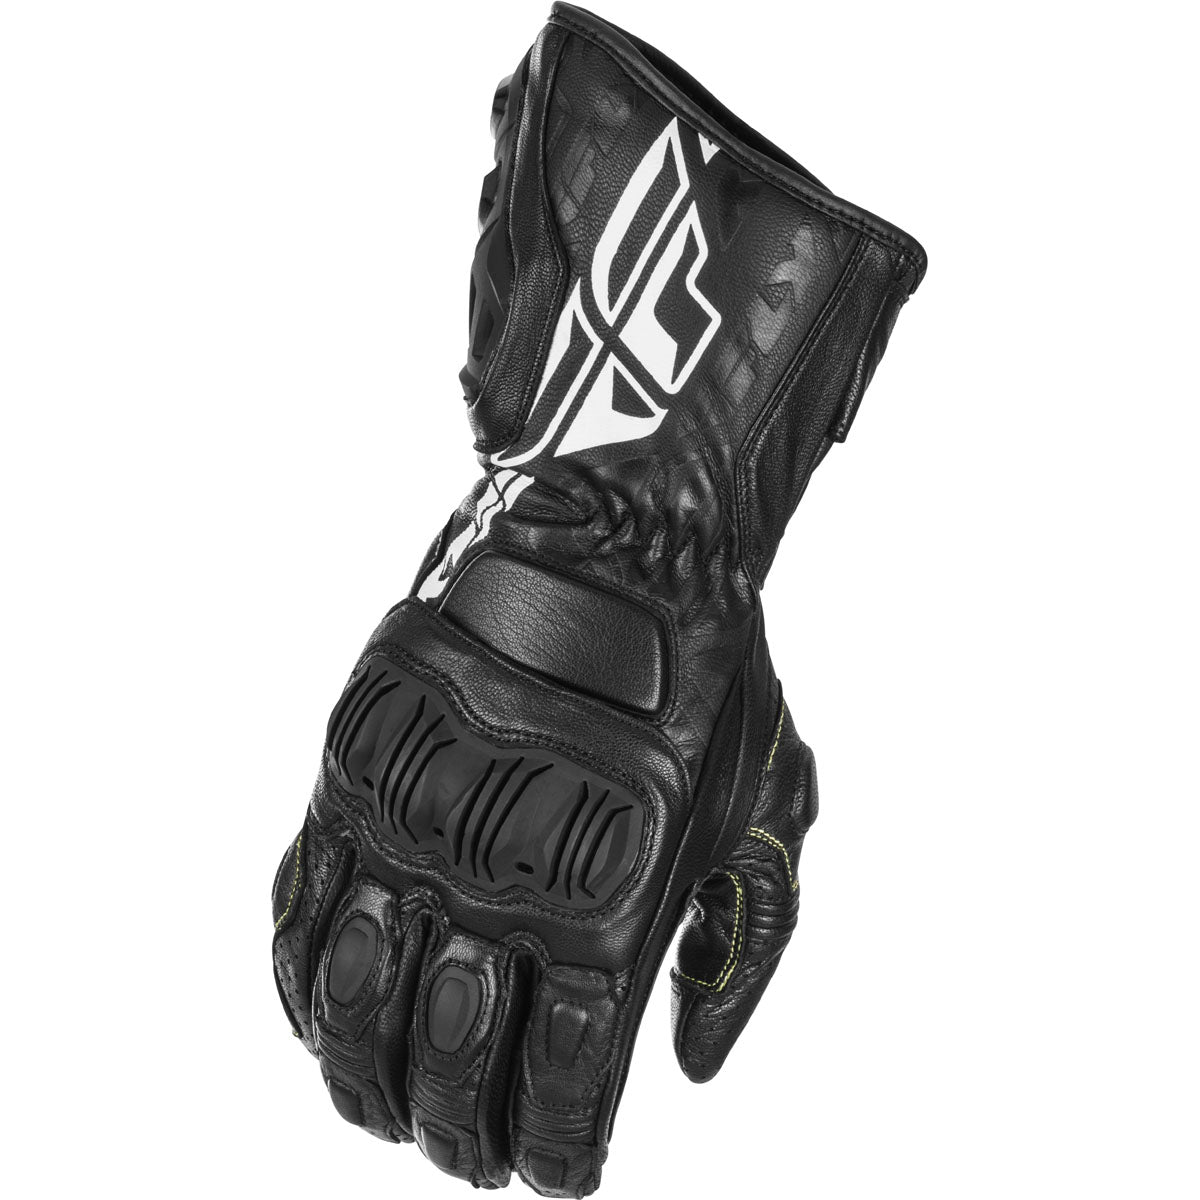 Fly Racing FL-2 Gloves - Closeout